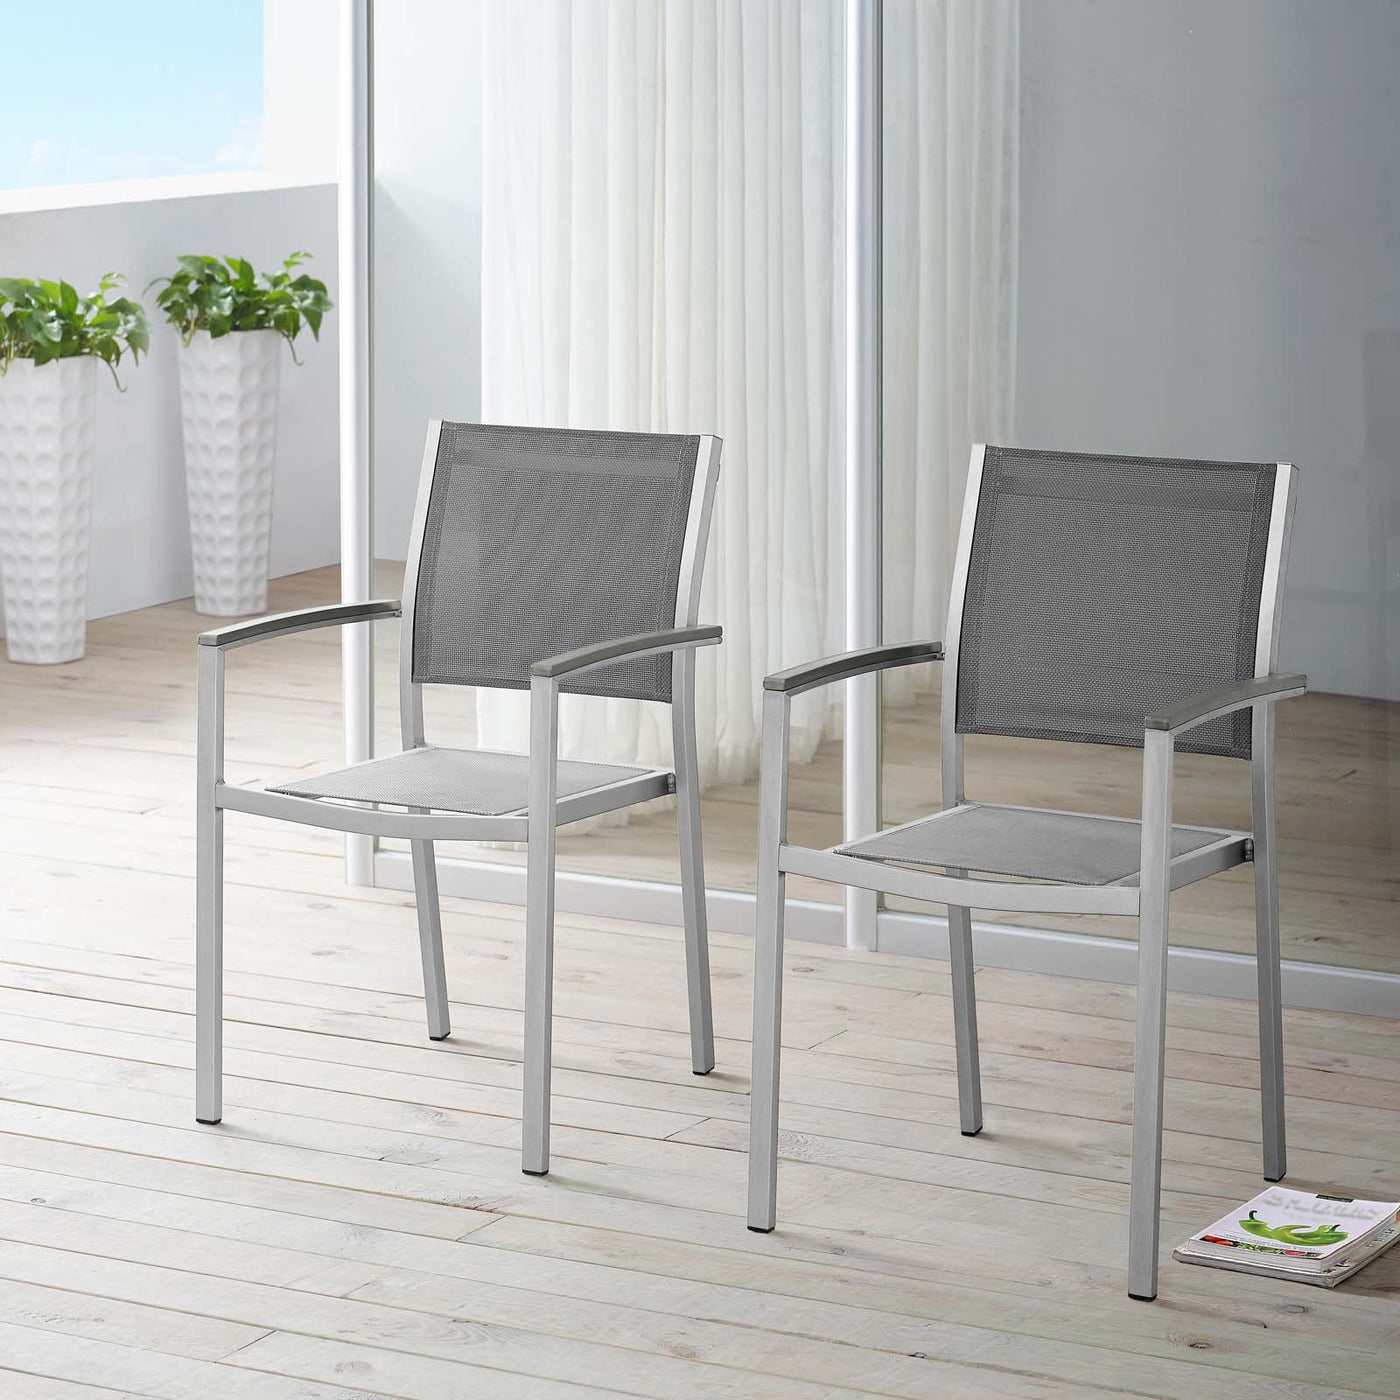 Shore Dining Chair Outdoor Patio Aluminum Set of 2